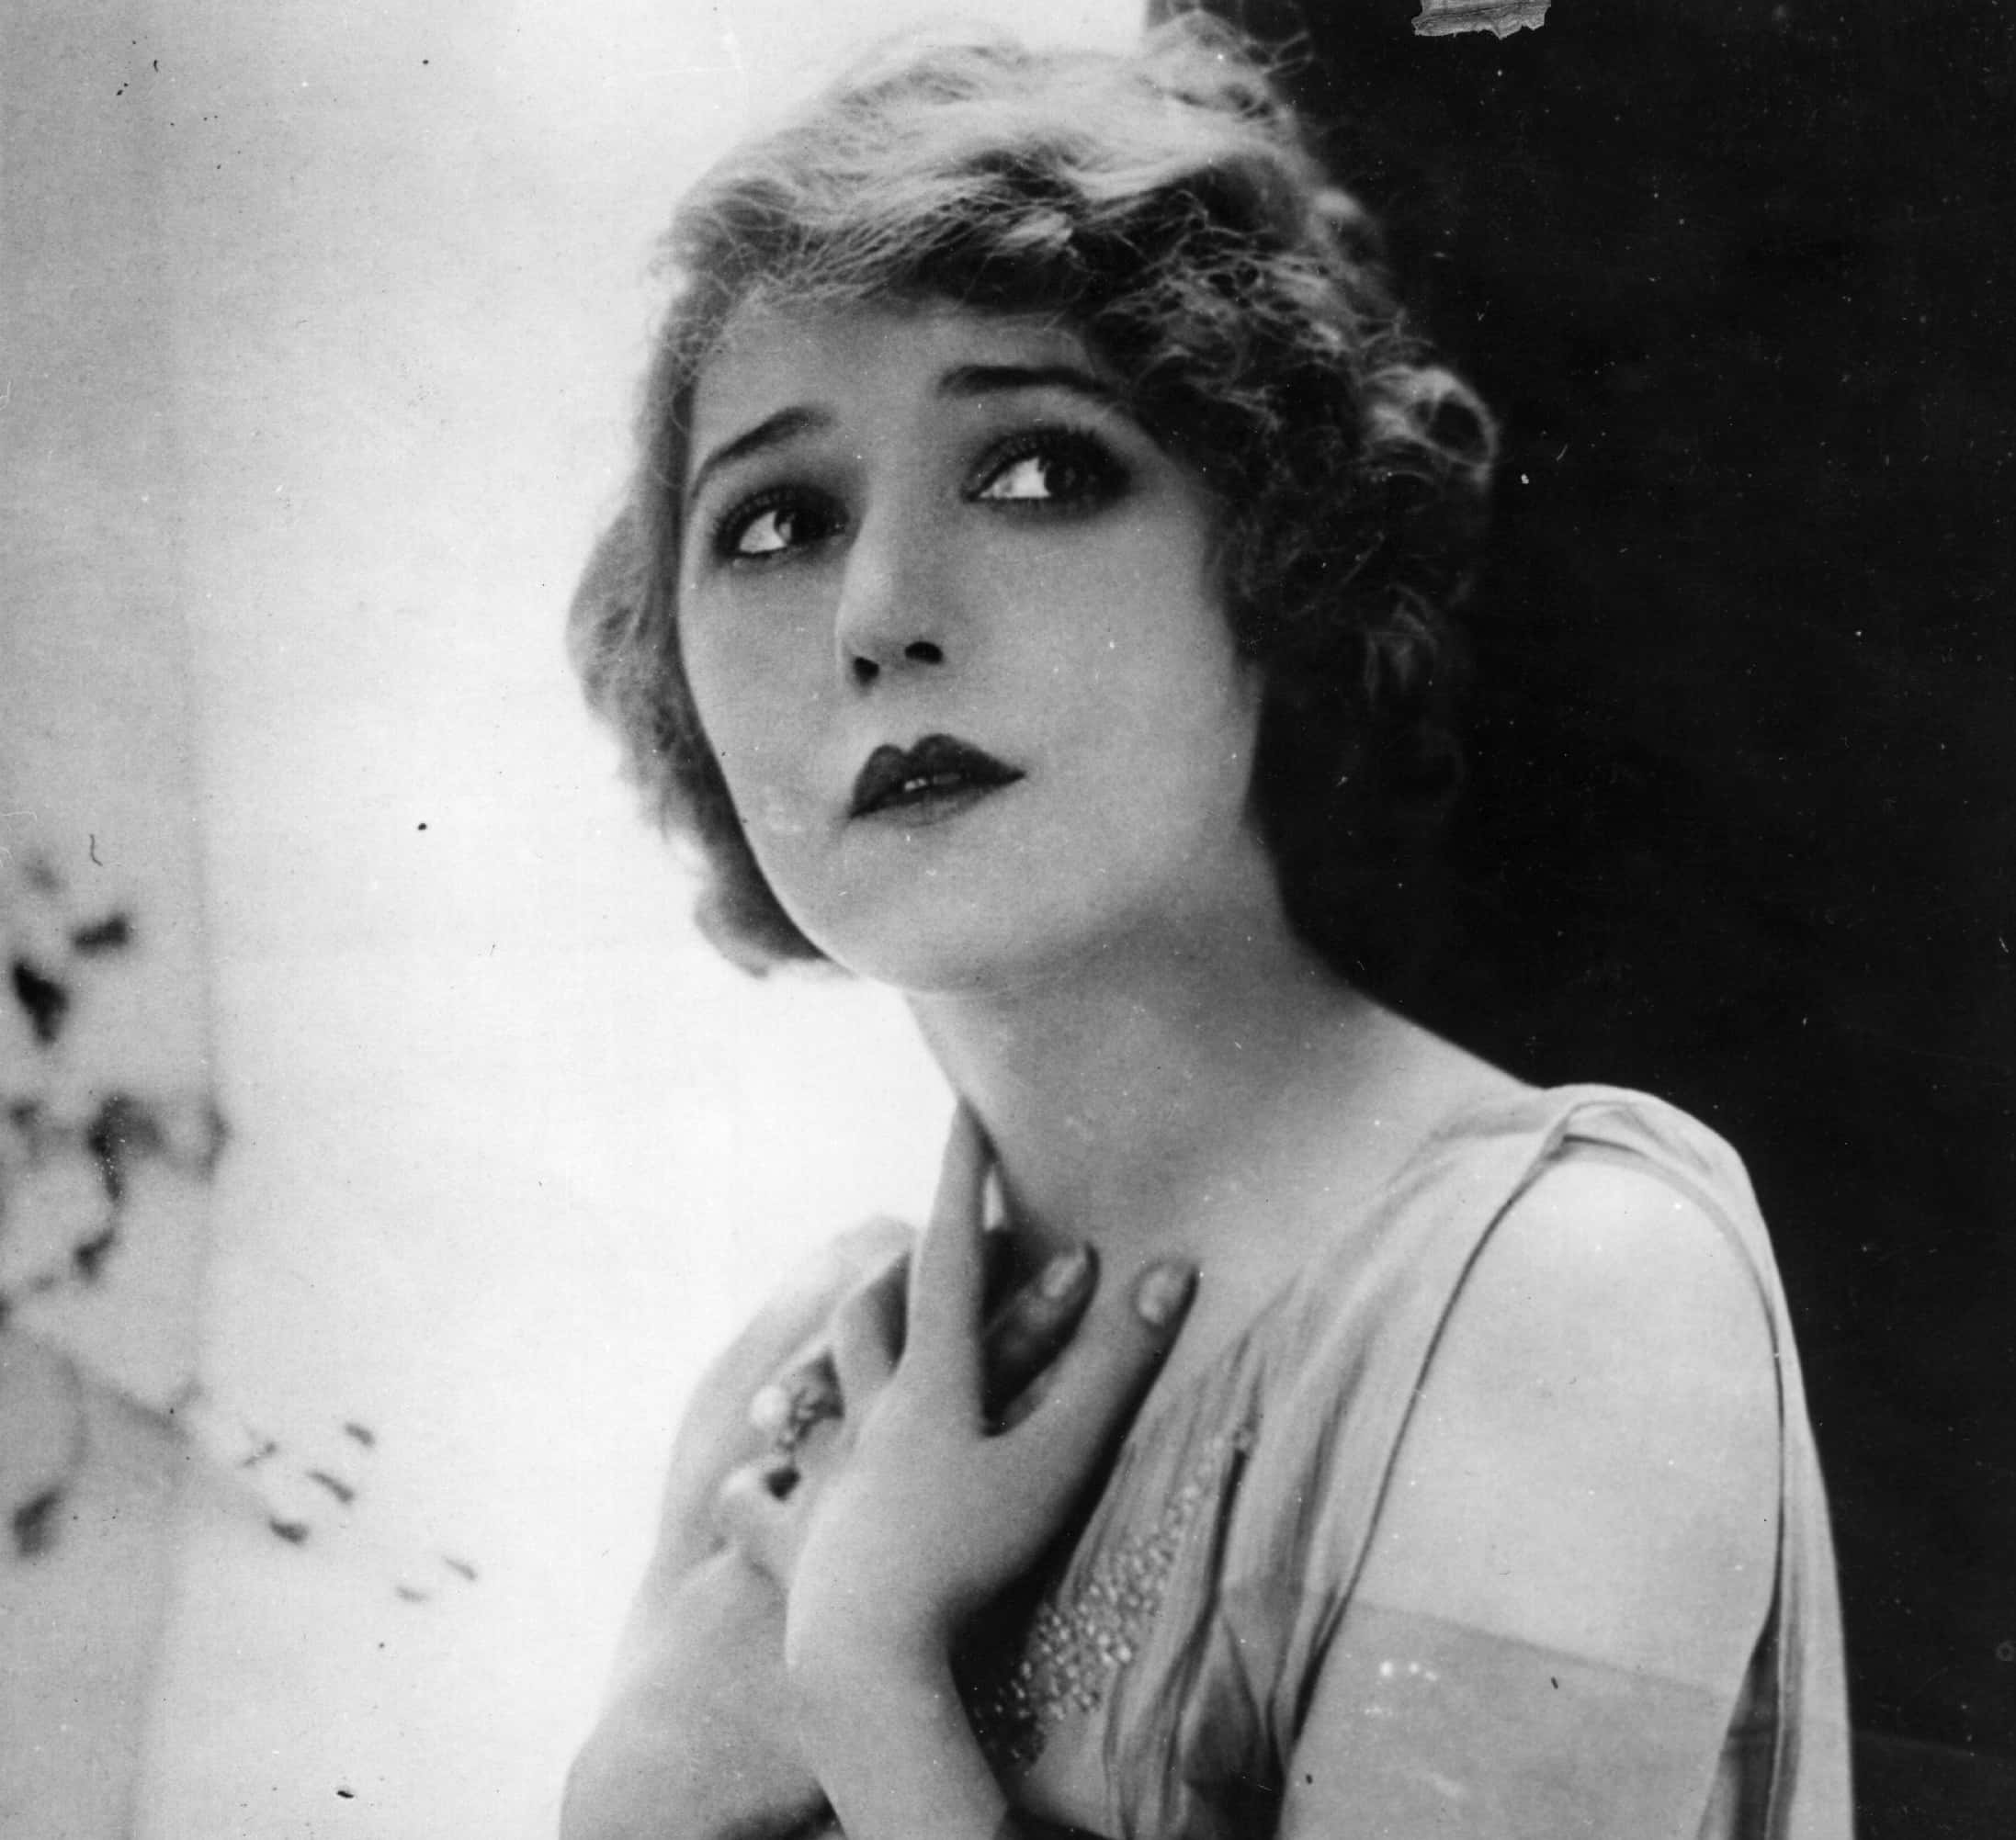 Mary Pickford facts